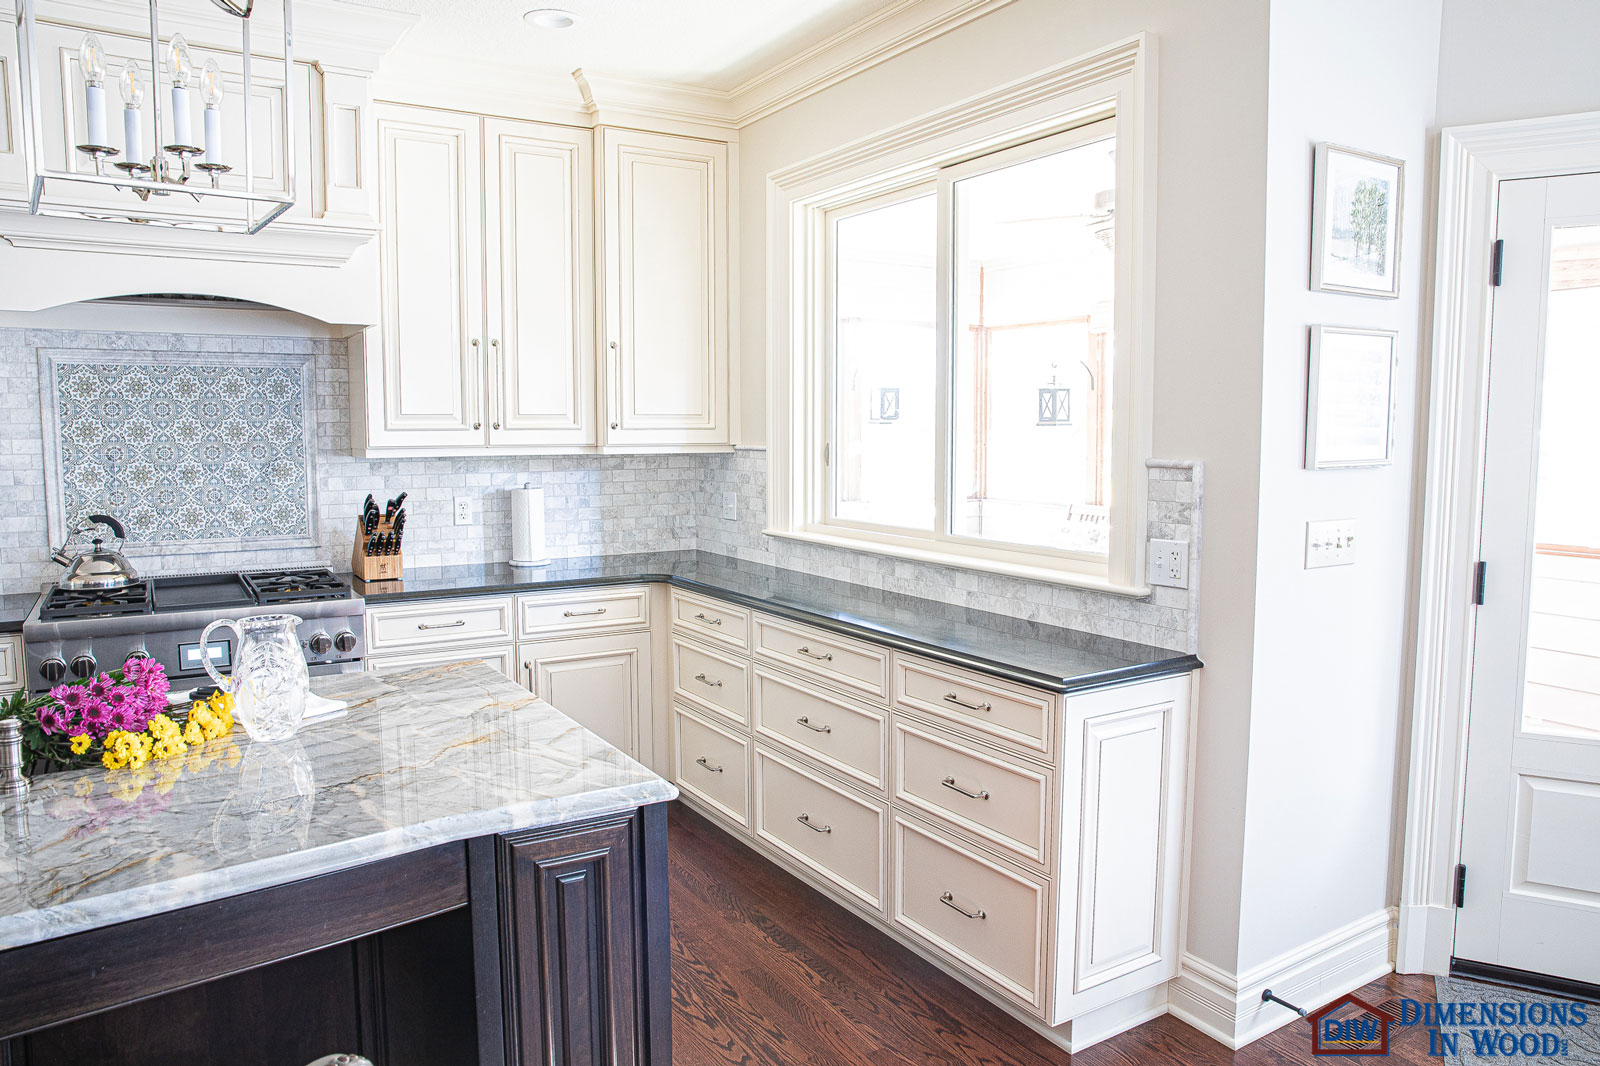 The Enduring Allure: Quartz Countertops for Beauty and Durability